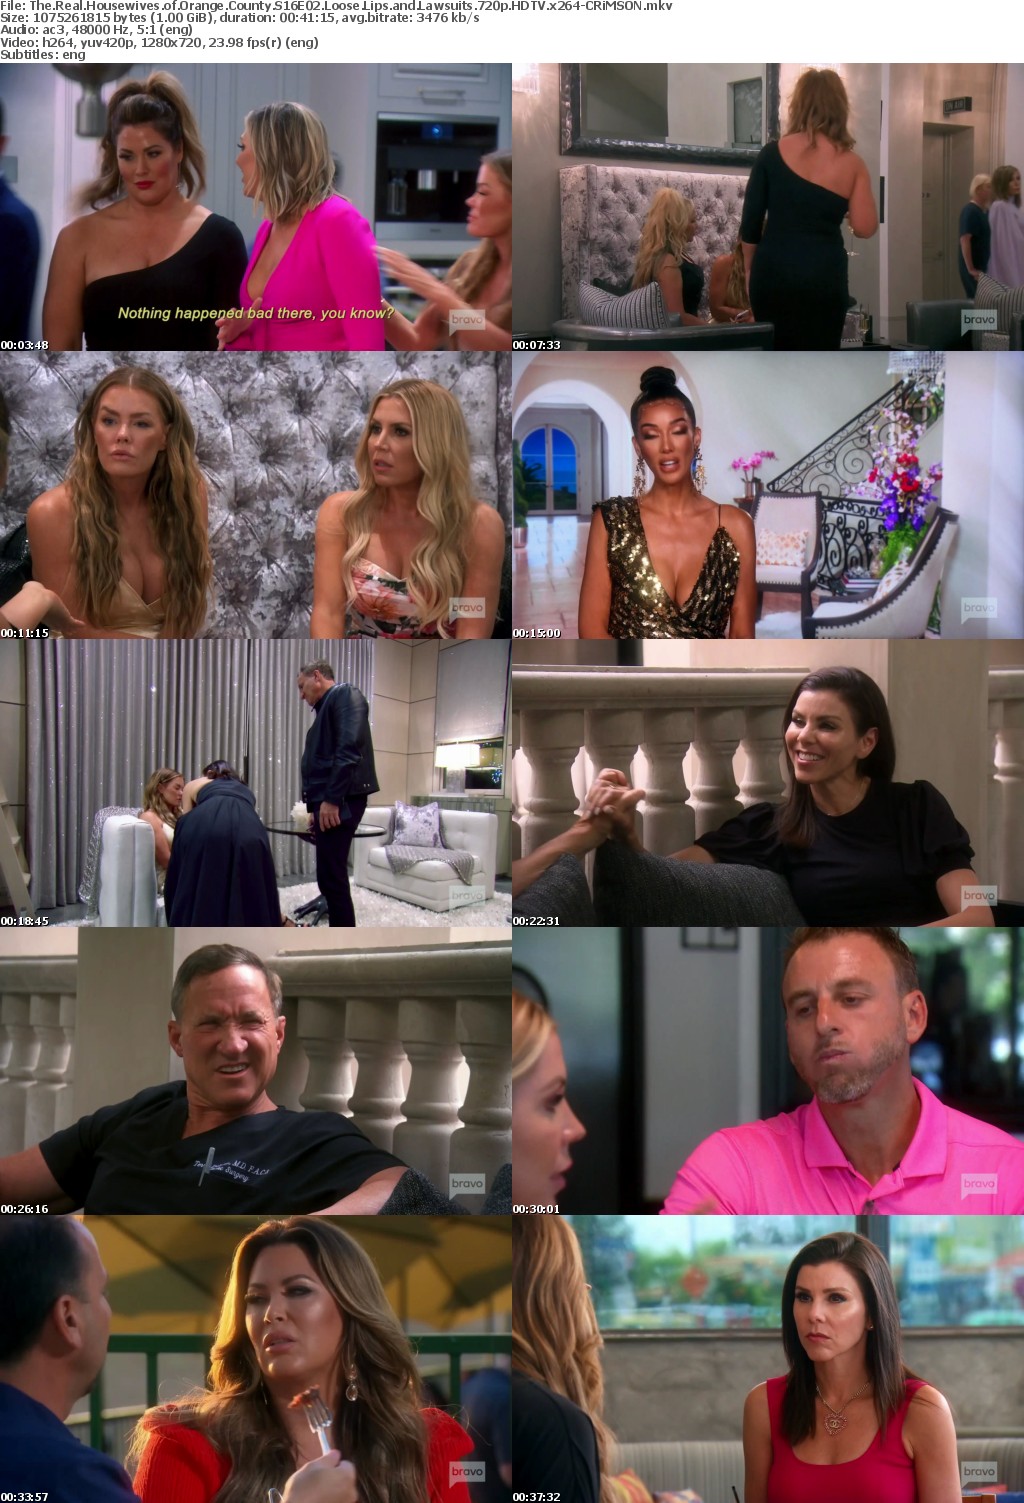 The Real Housewives of Orange County S16E02 Loose Lips and Lawsuits 720p HDTV x264-CRiMSON